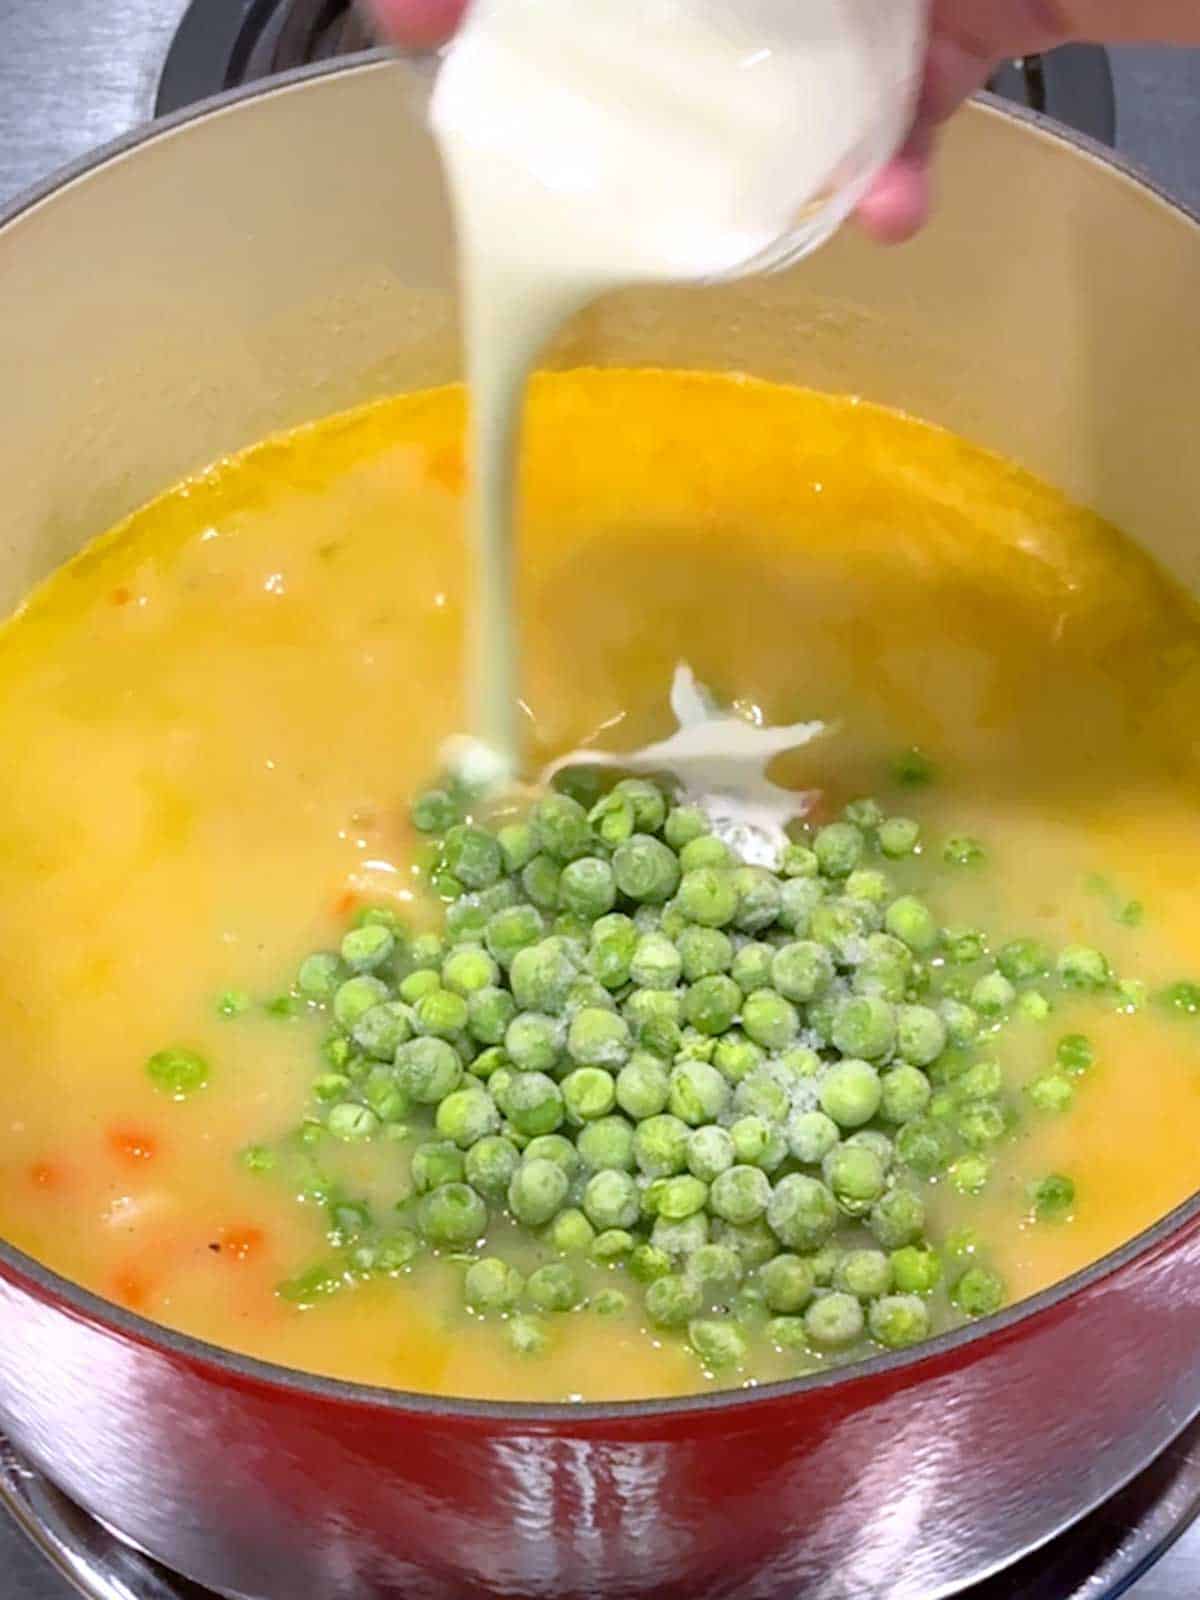 Adding frozen green peas and cream to the stew.